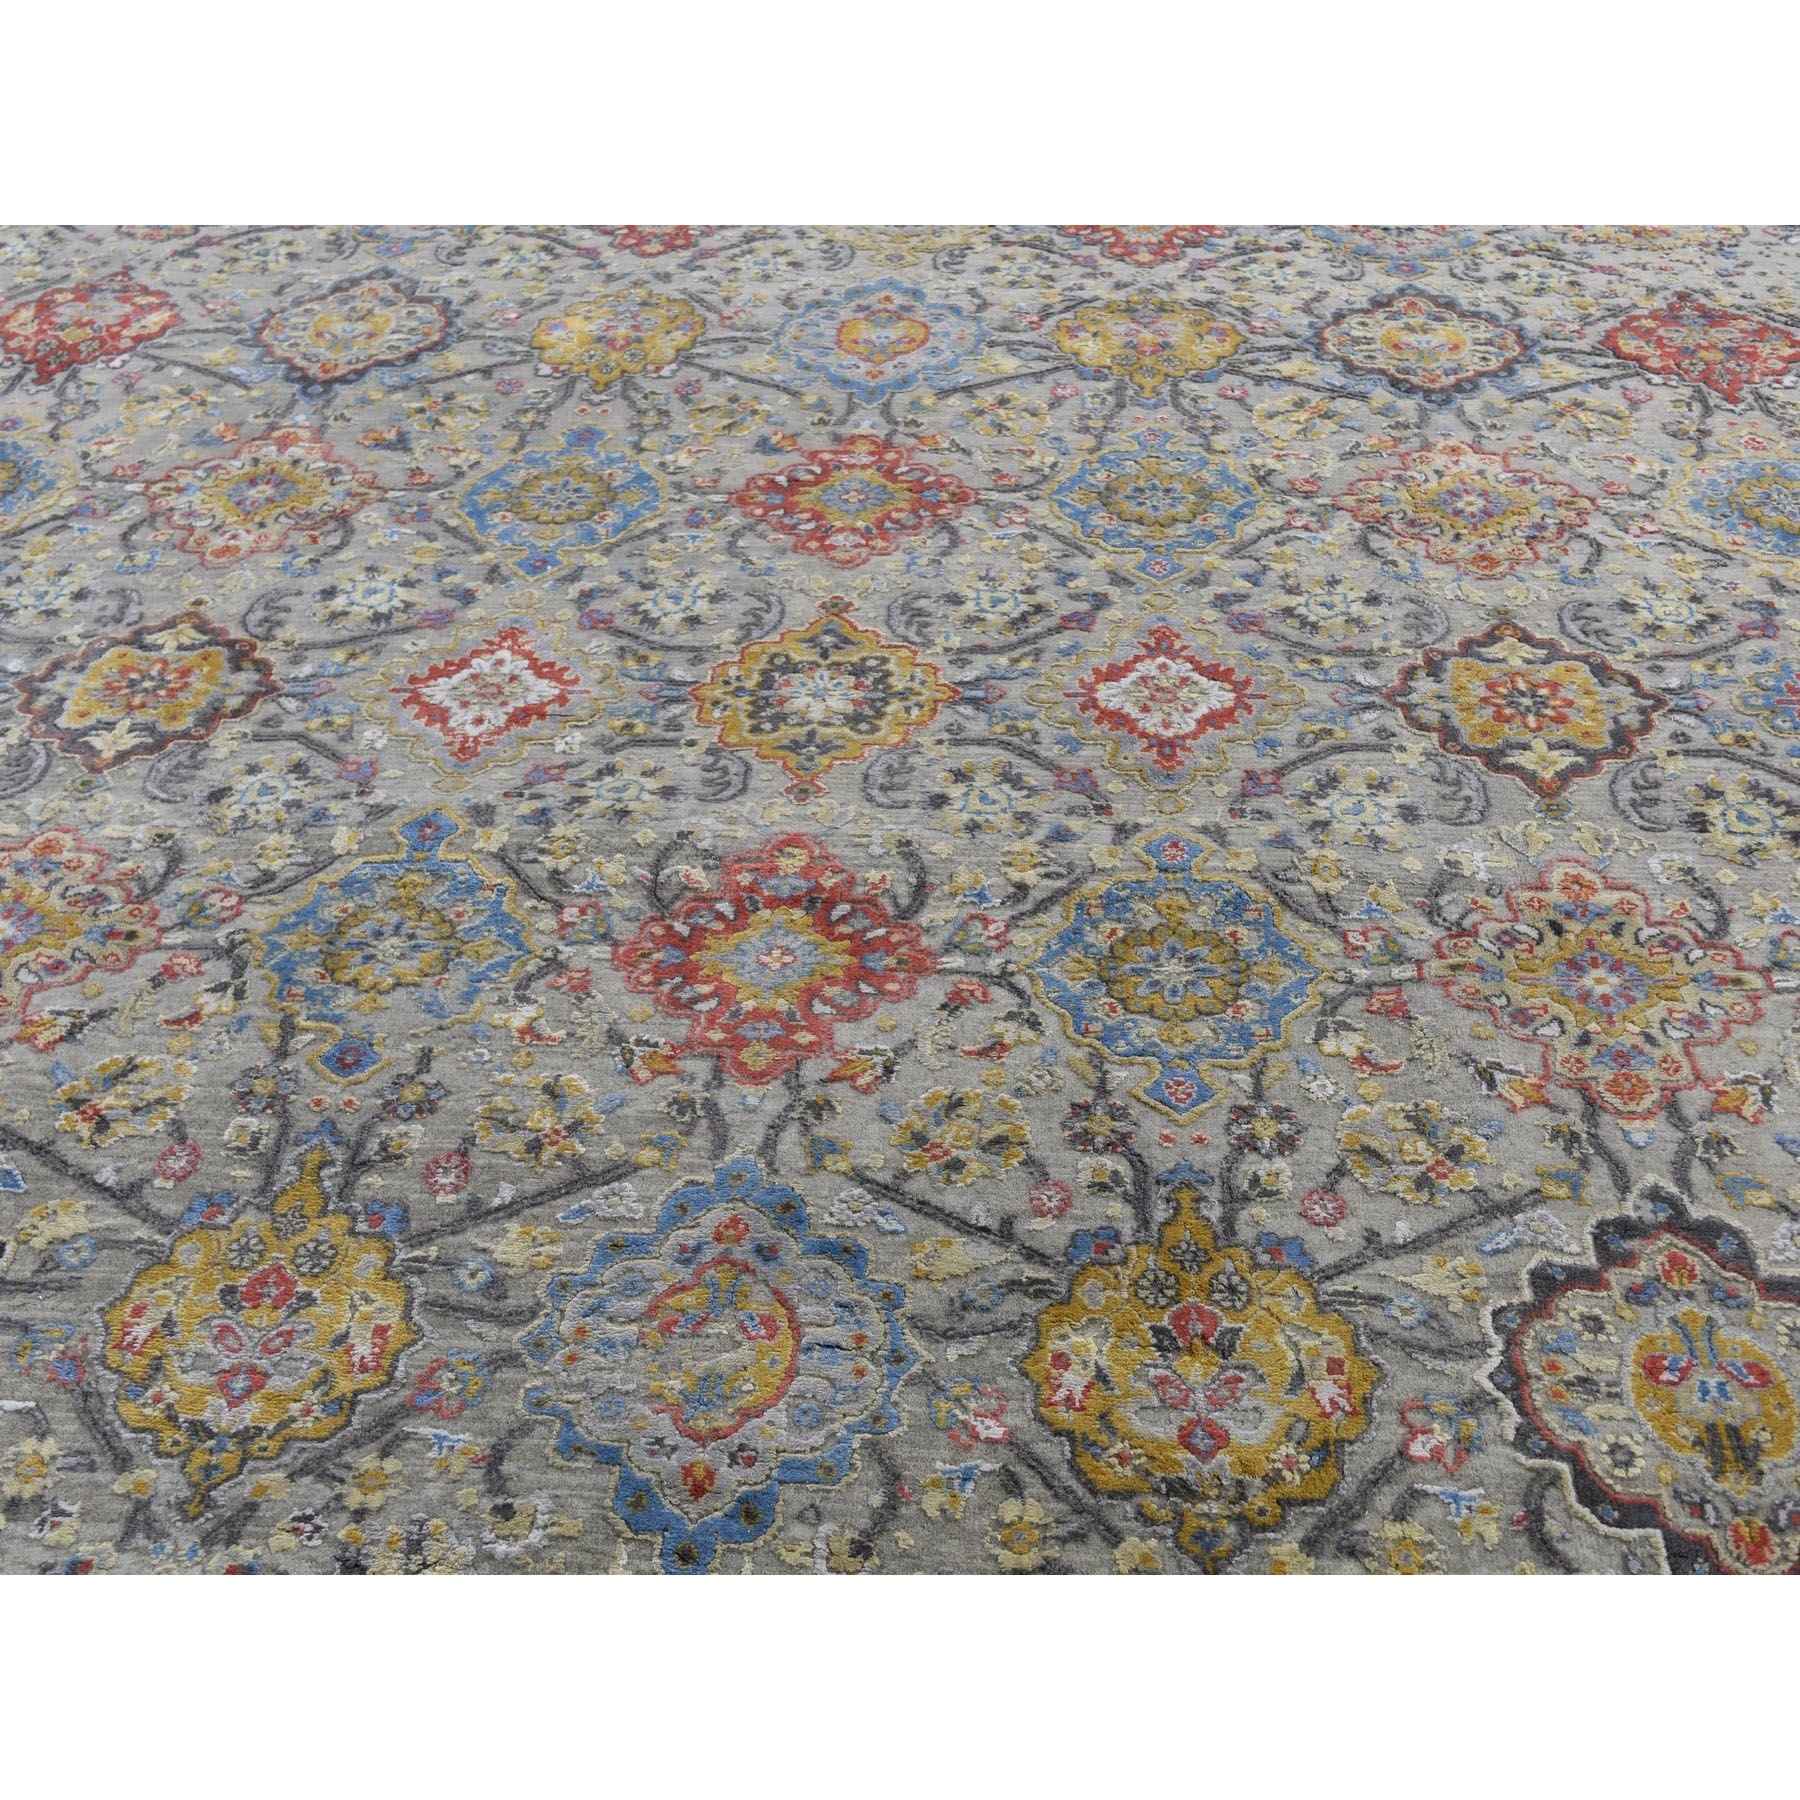 9-1 x12- THE SUNSET ROSETTES Pure Silk and Wool Hand Knotted Oriental Rug 